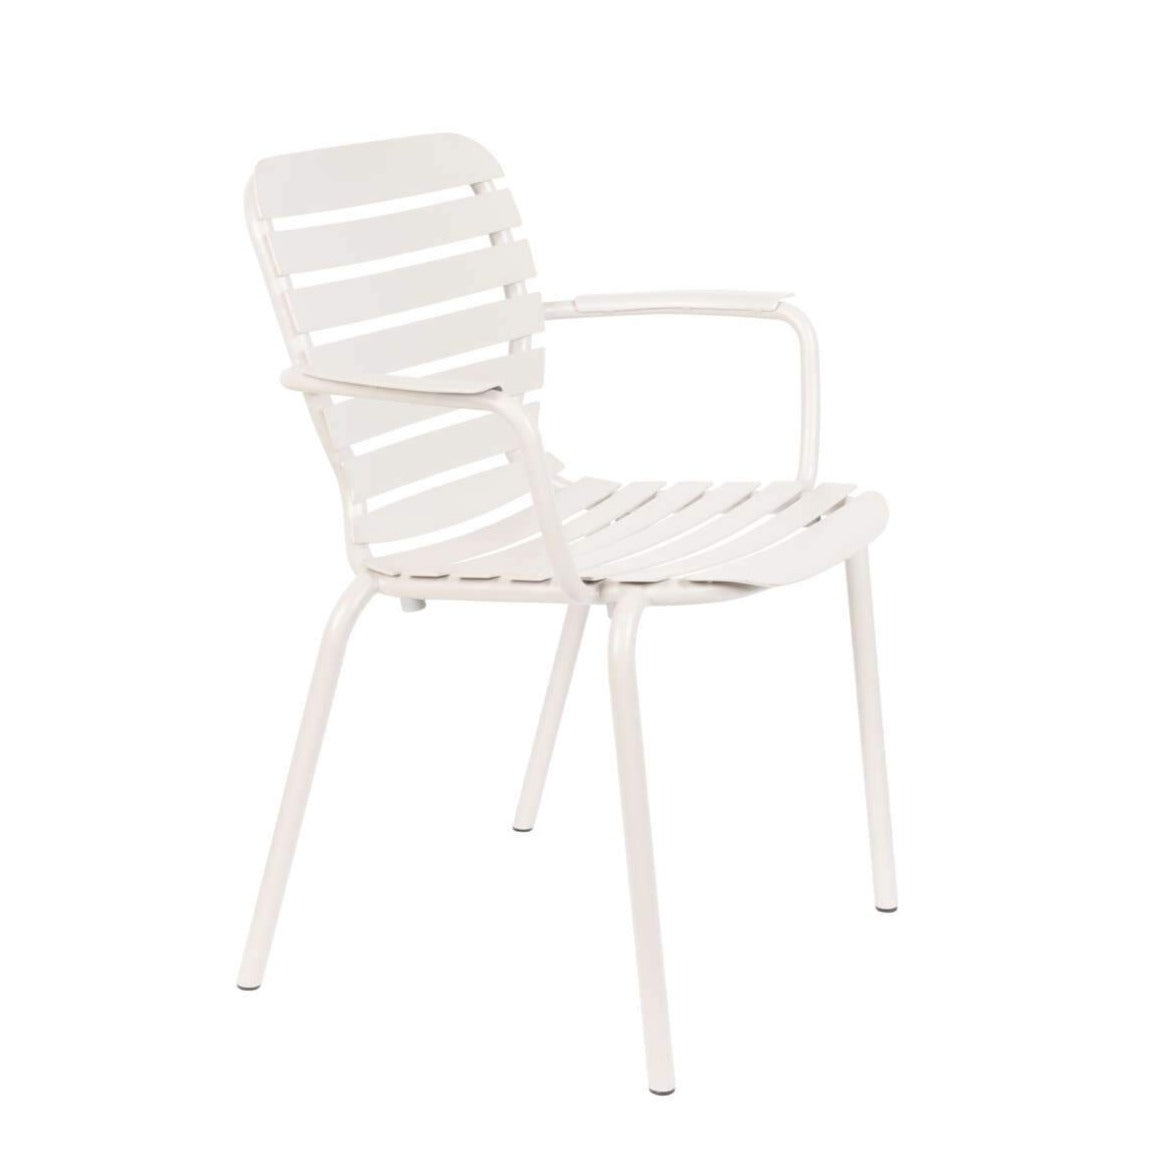 The Vondel garden chair was created for lovers of the sun, morning coffee on a modern terrace and joint Sunday dinners outside. The comfortable location of the armrests allows for comfortable location of the hands. The seat is made of the highest quality aluminum, thanks to which the furniture is resistant to weather conditions such as wind, rain and sunlight. This armchair will make a spectacle during summer meetings with friends outside.